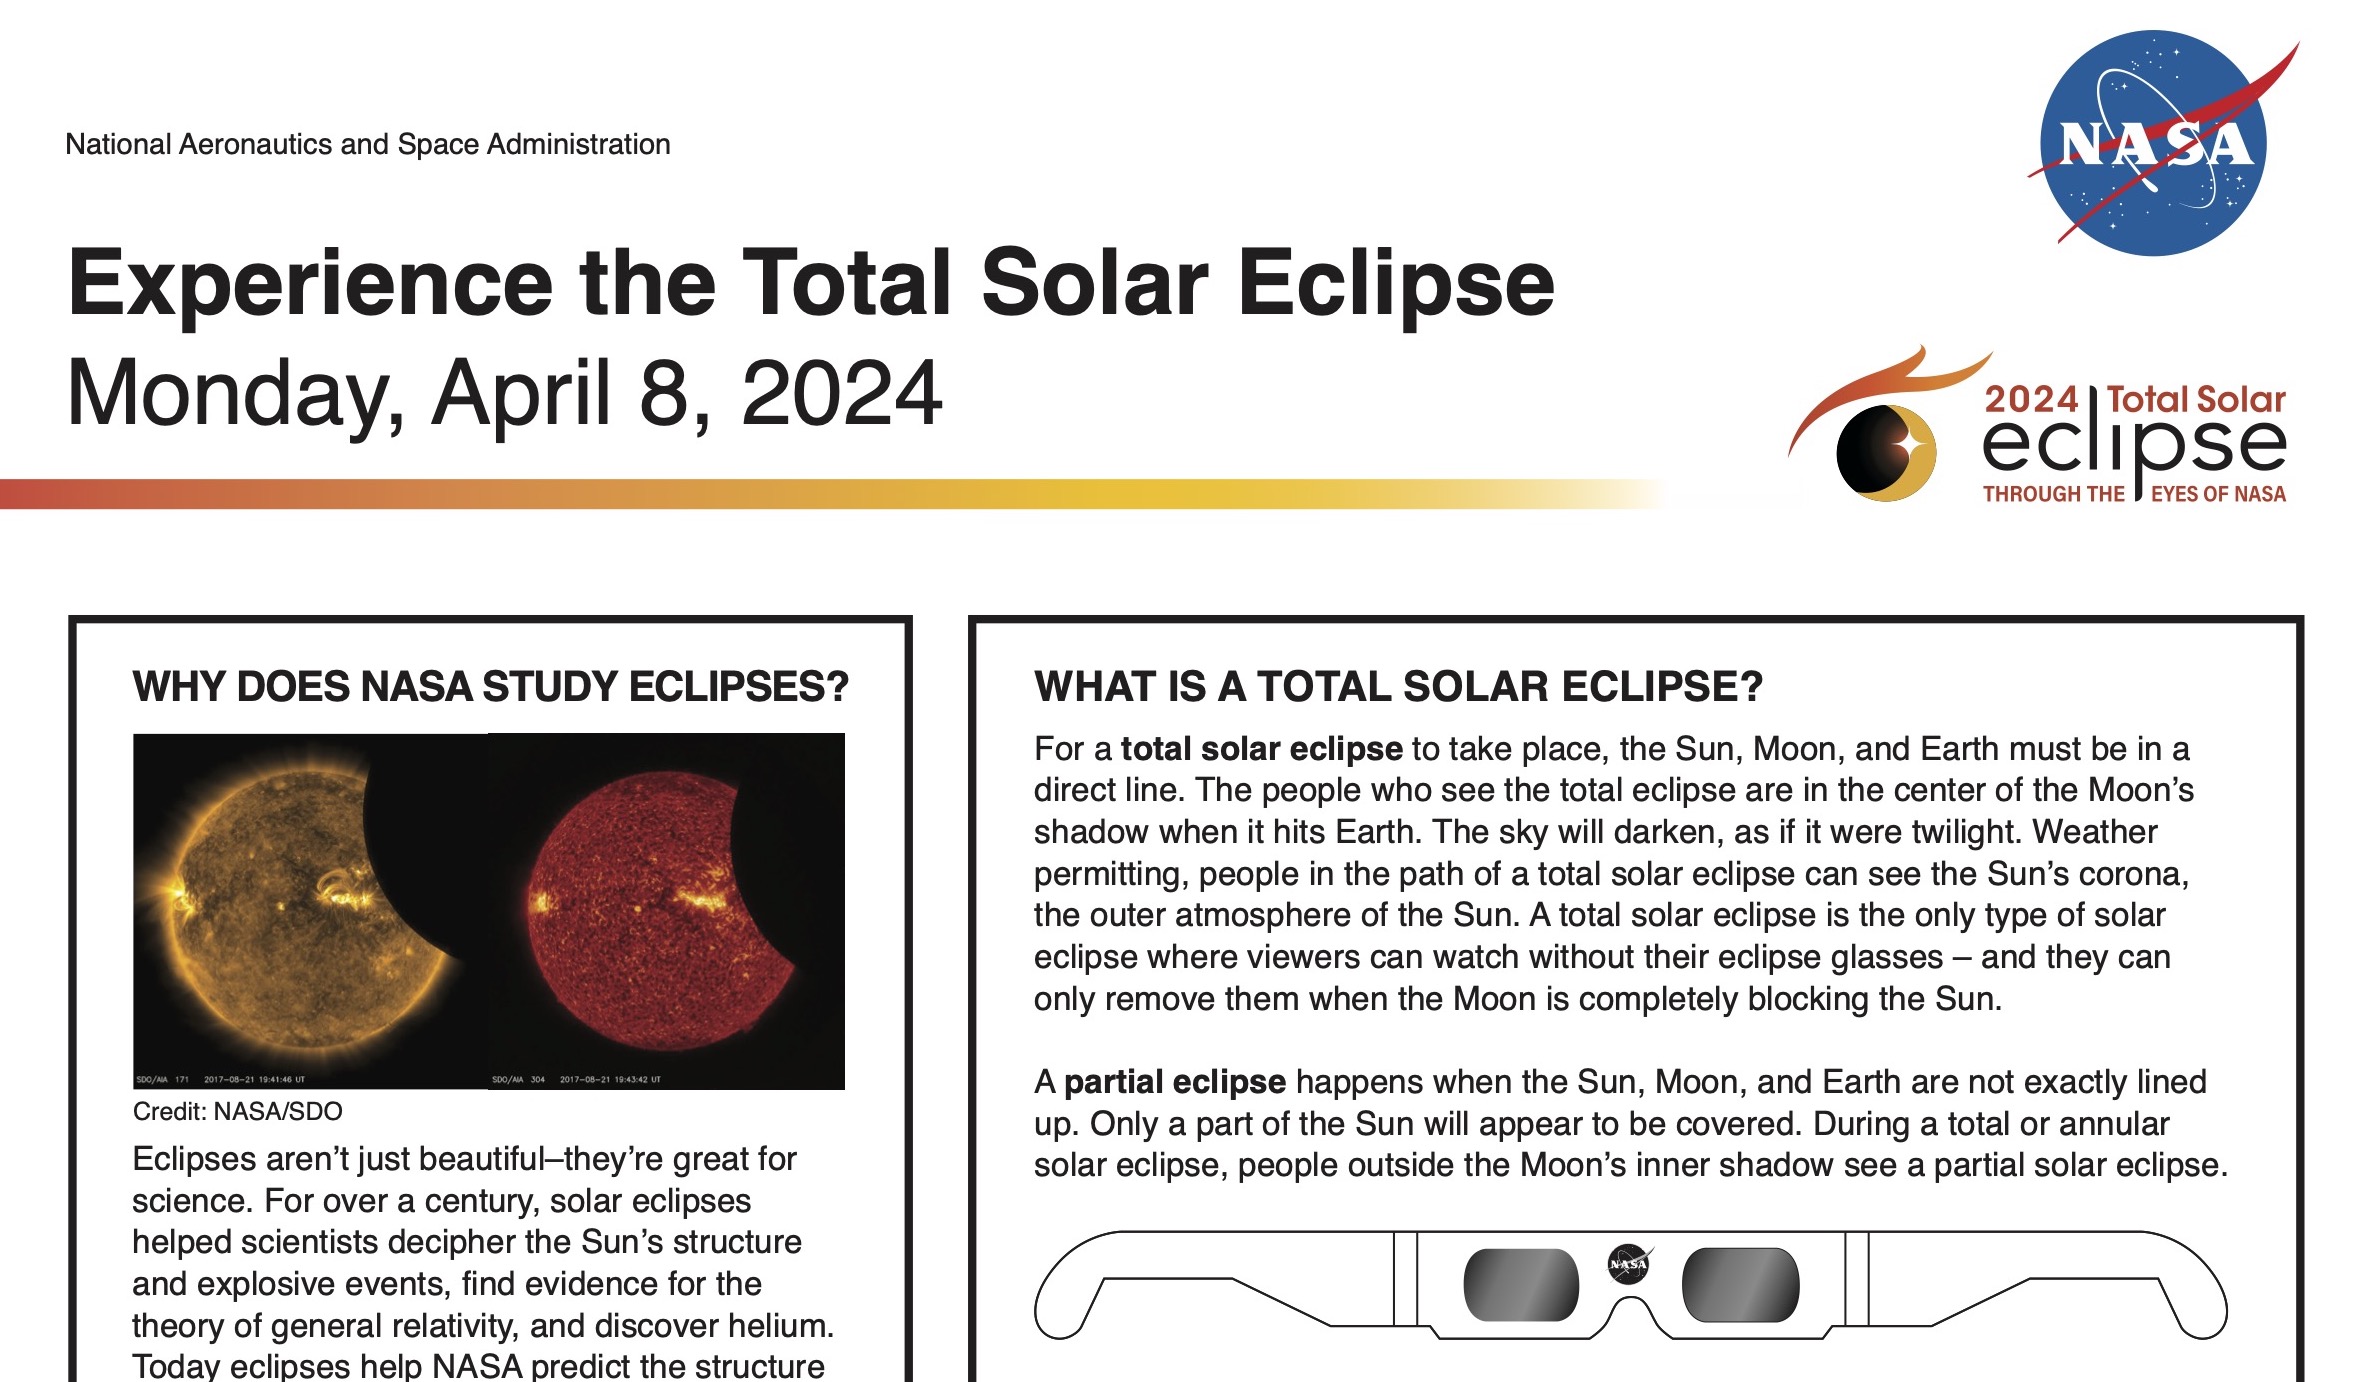 A portion of the total solar eclipse fact sheet, showing a title that reads "Experience the Total Solar Eclipse, Monday, April 8, 2024" and some blocks of text with more detail of the event.